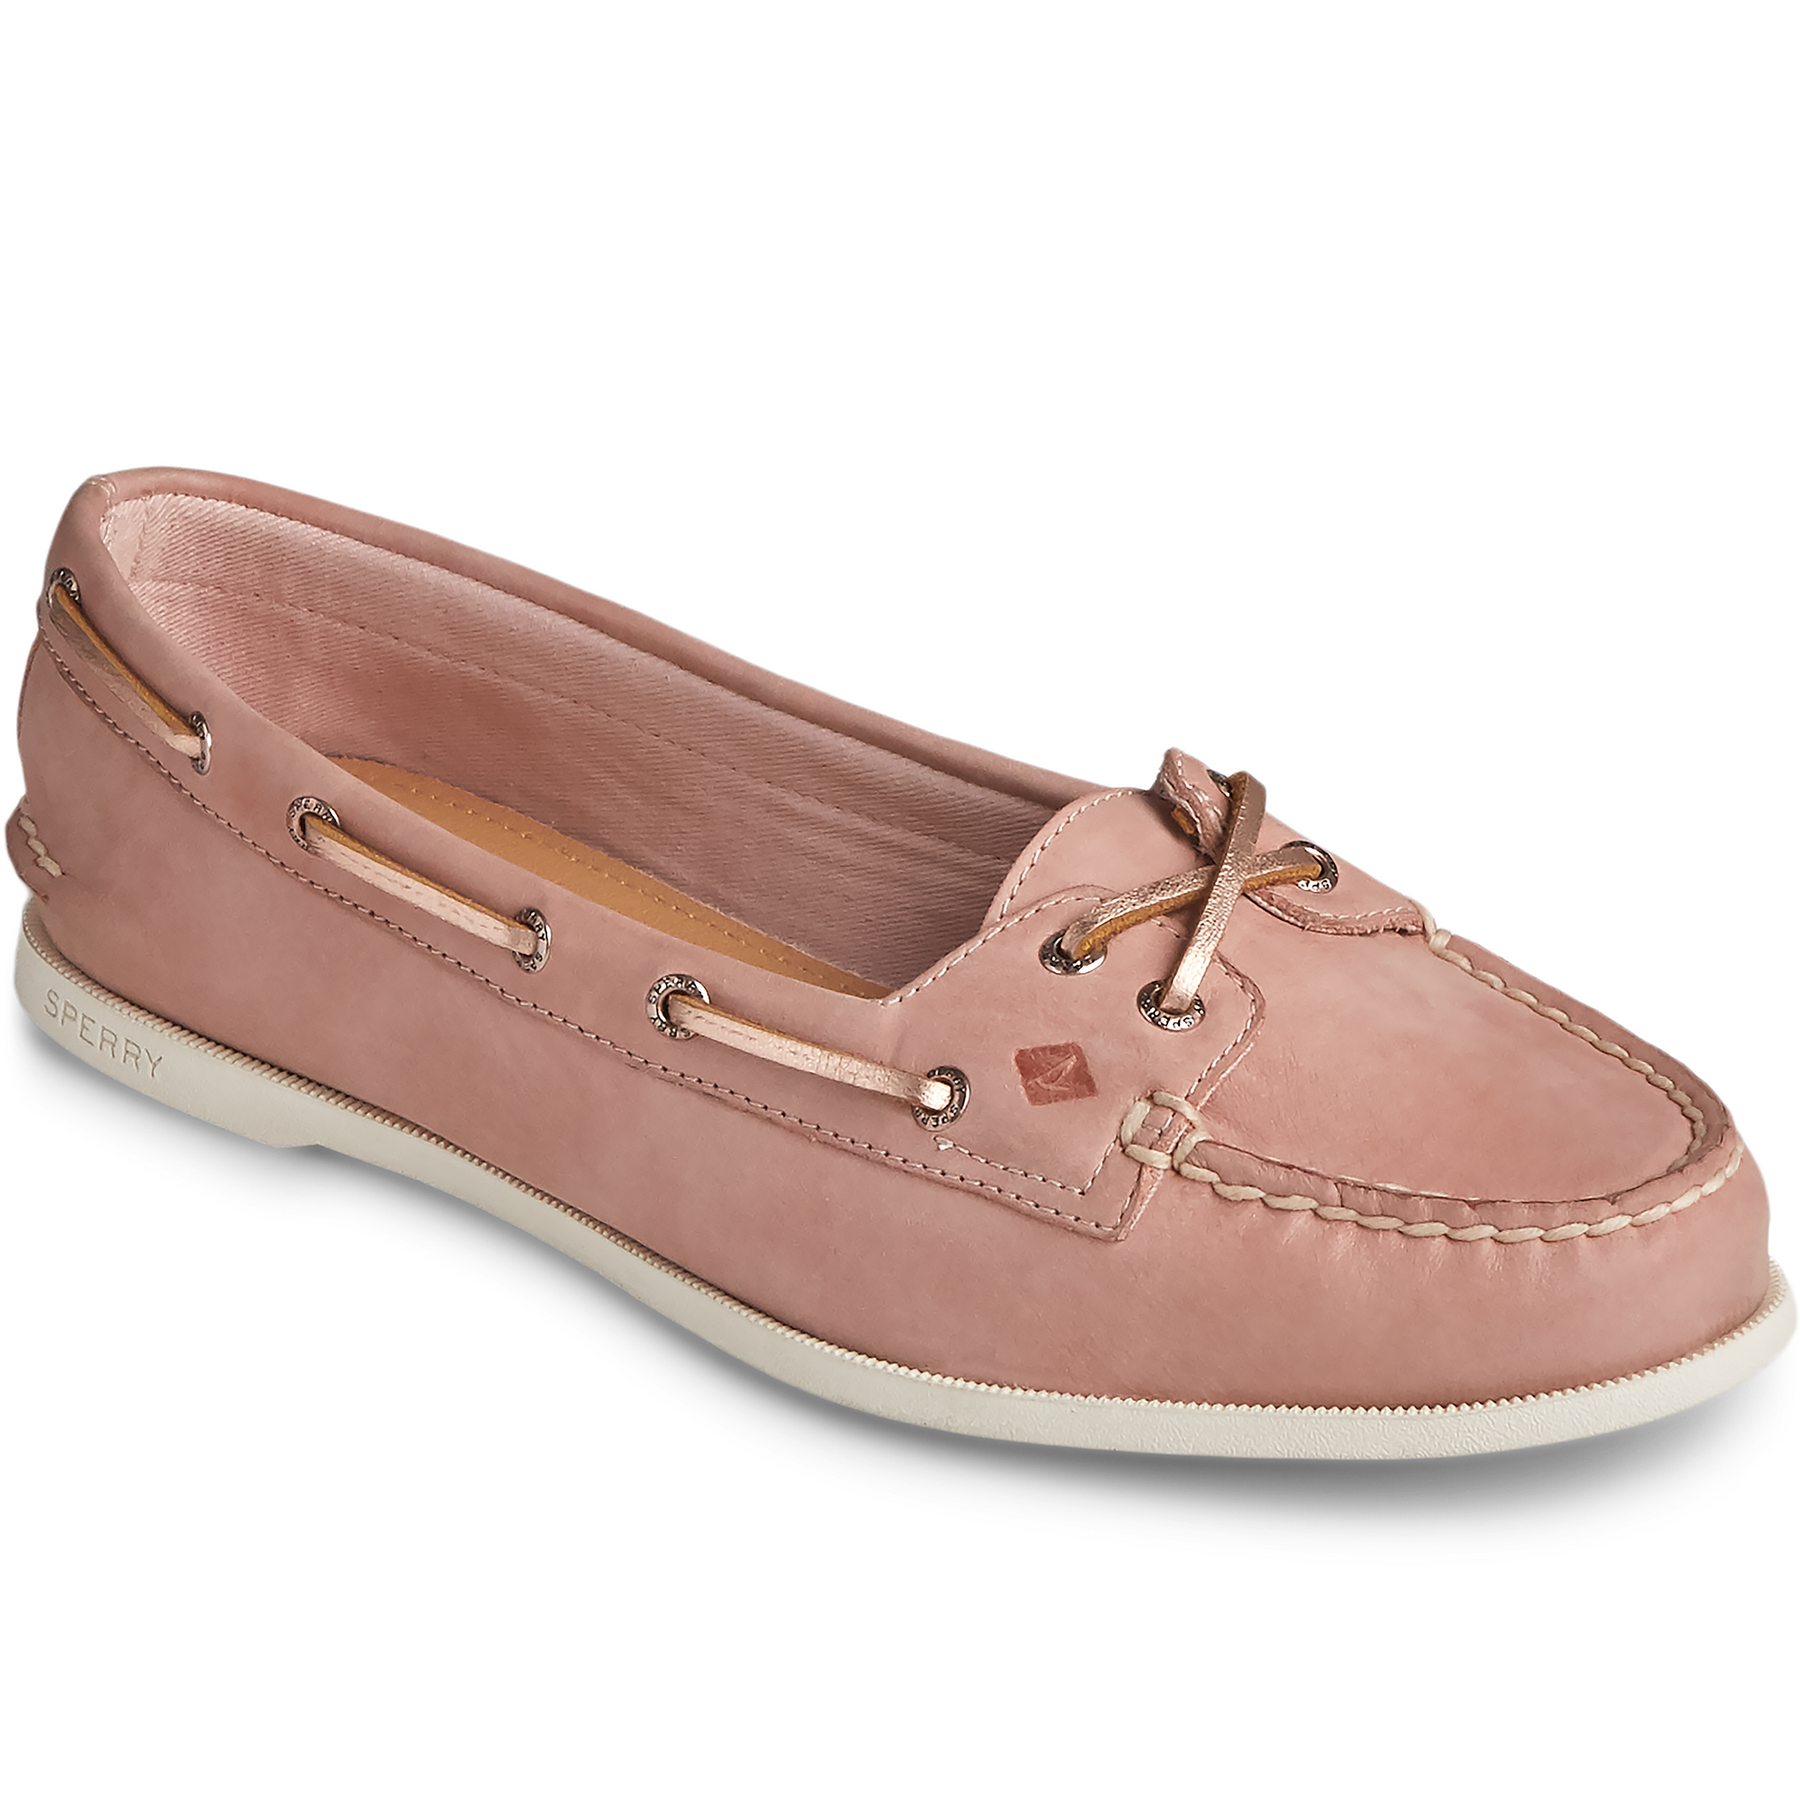 Women's Authentic Original Skimmer Starlight Blush Boat Shoes (STS85361)